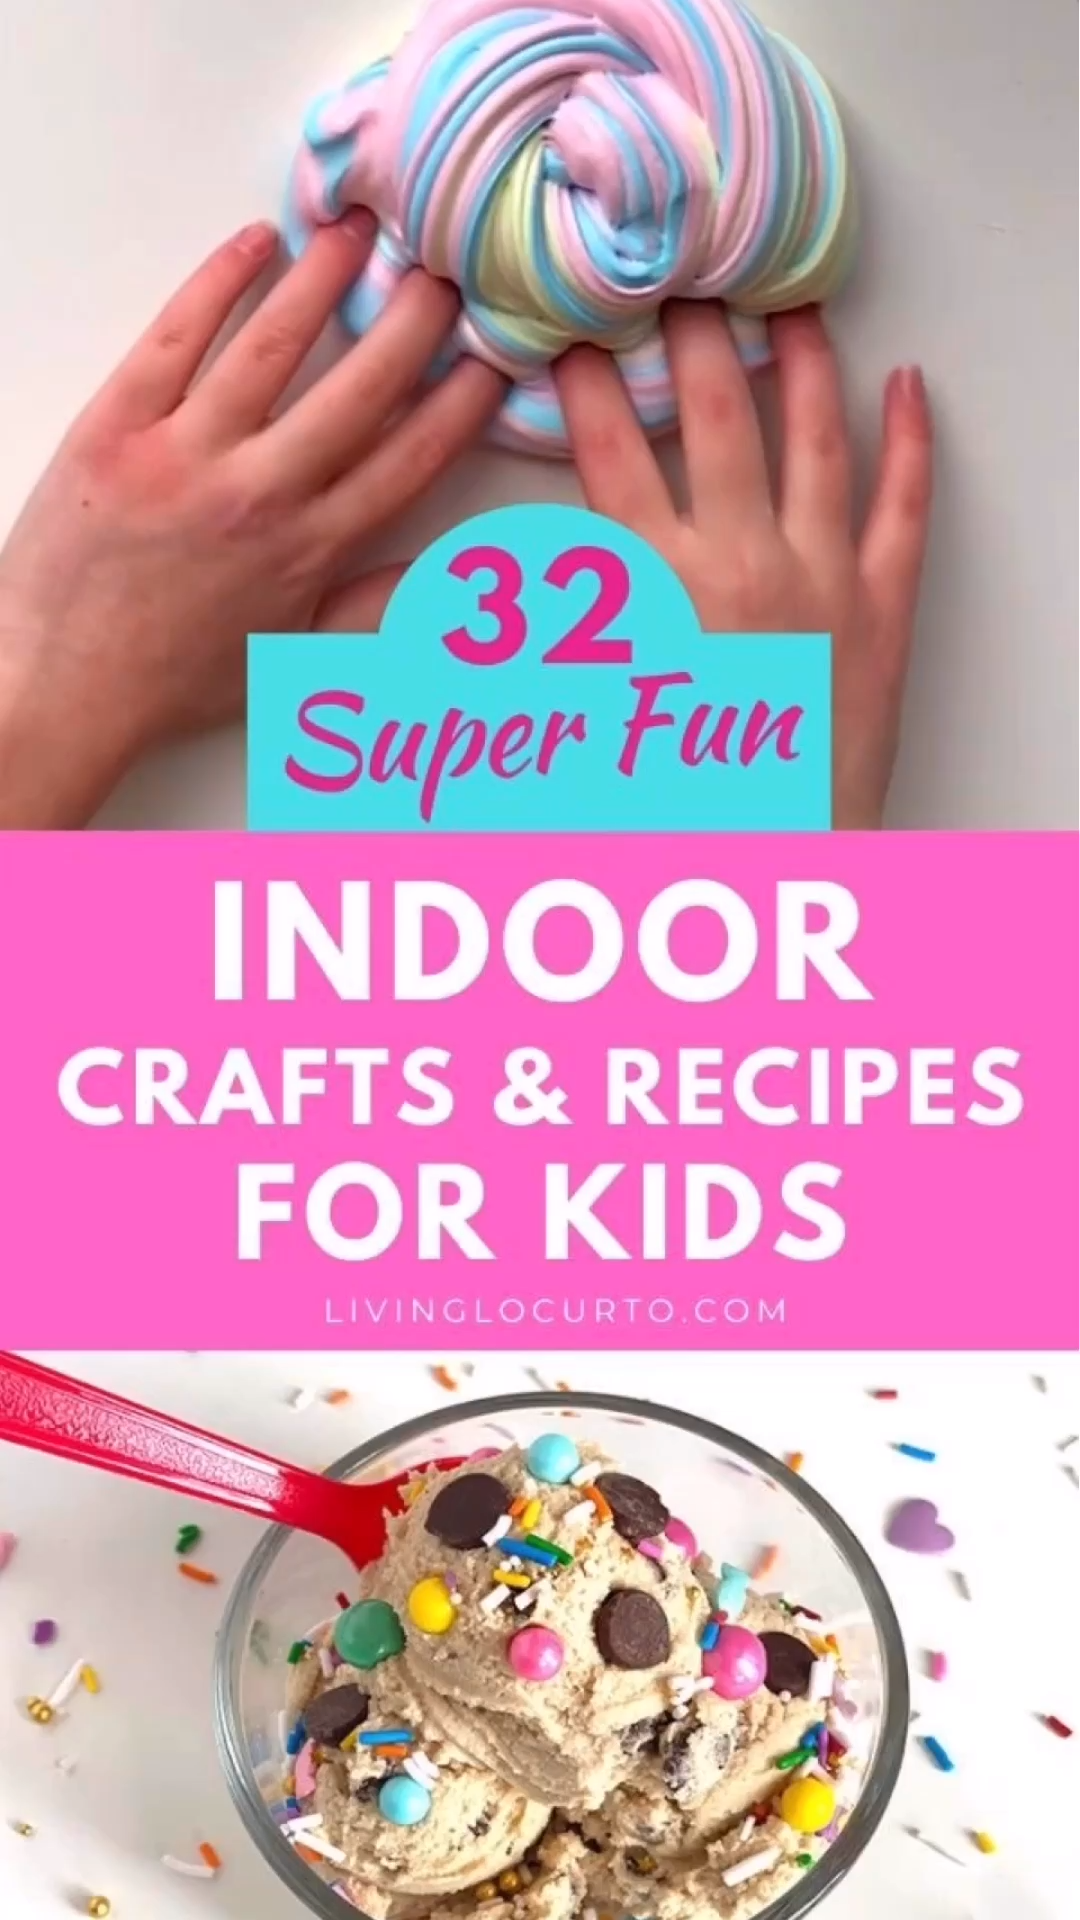 Indoor Crafts For Kids - Indoor Crafts For Kids -   19 diy Projects for teen girls ideas